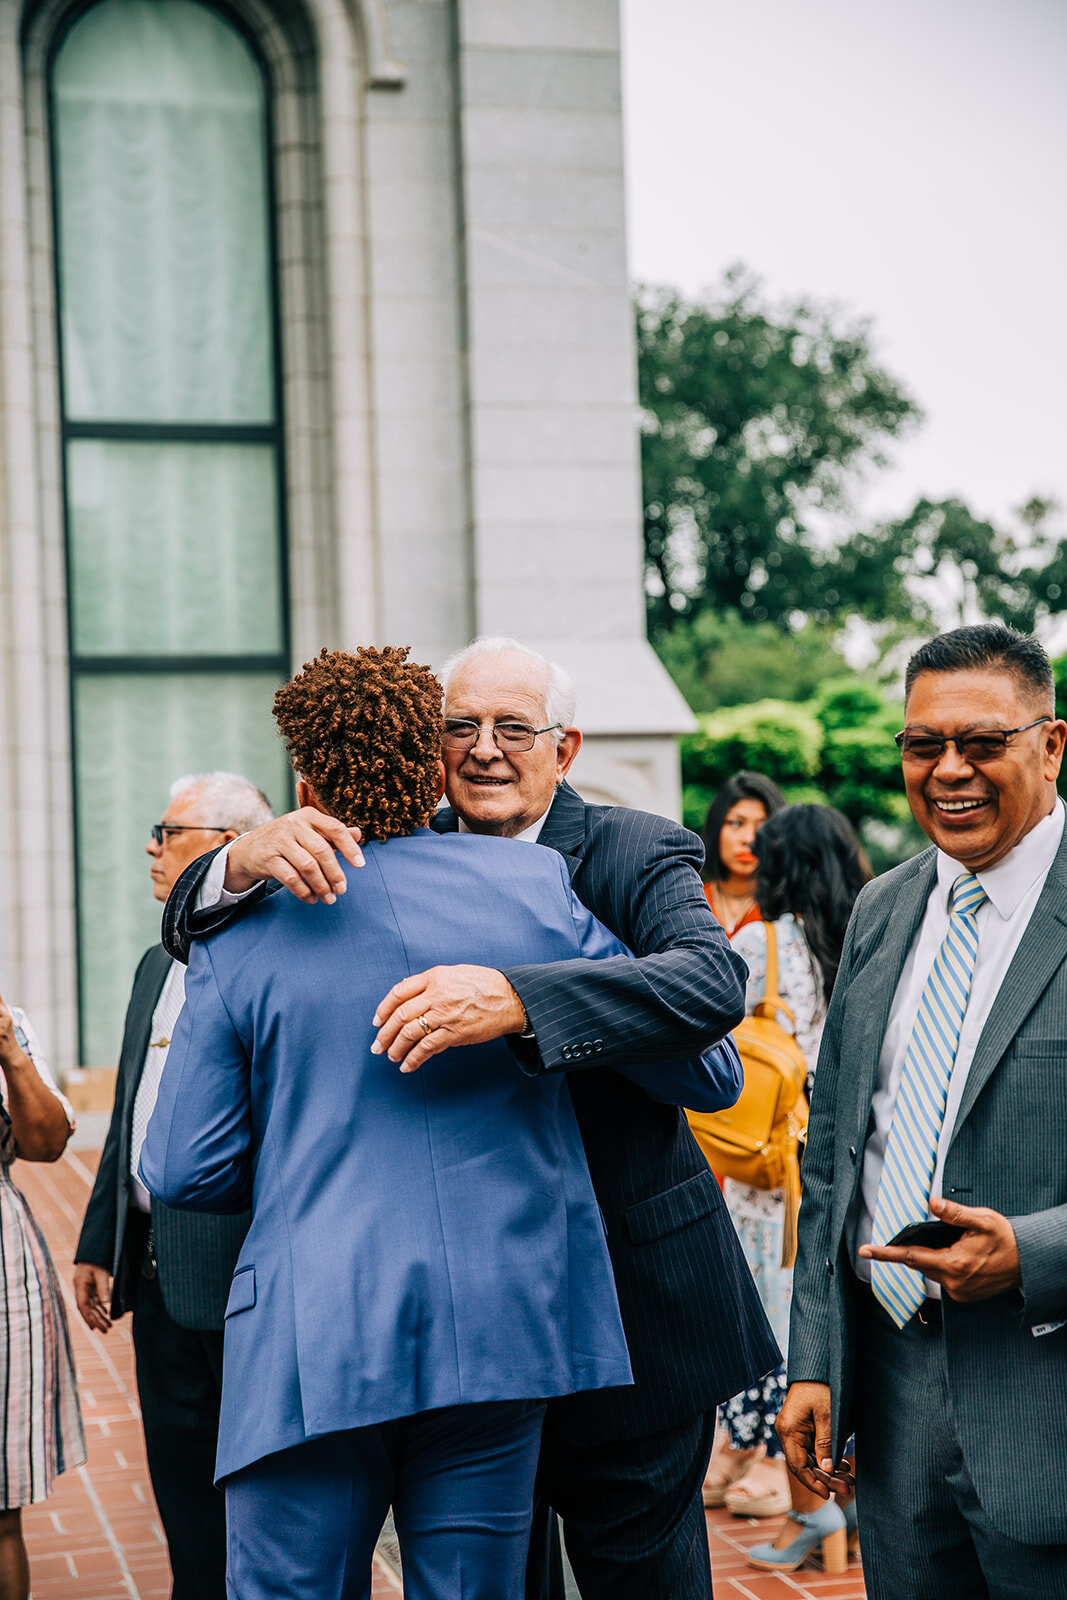  groom hugging his grandpa outside the temple after his wedding ceremony salt lake city utah wedding photographer pictures from the wedding day groom blue suit affordable wedding photos professional photographer bella alder photography groom style in